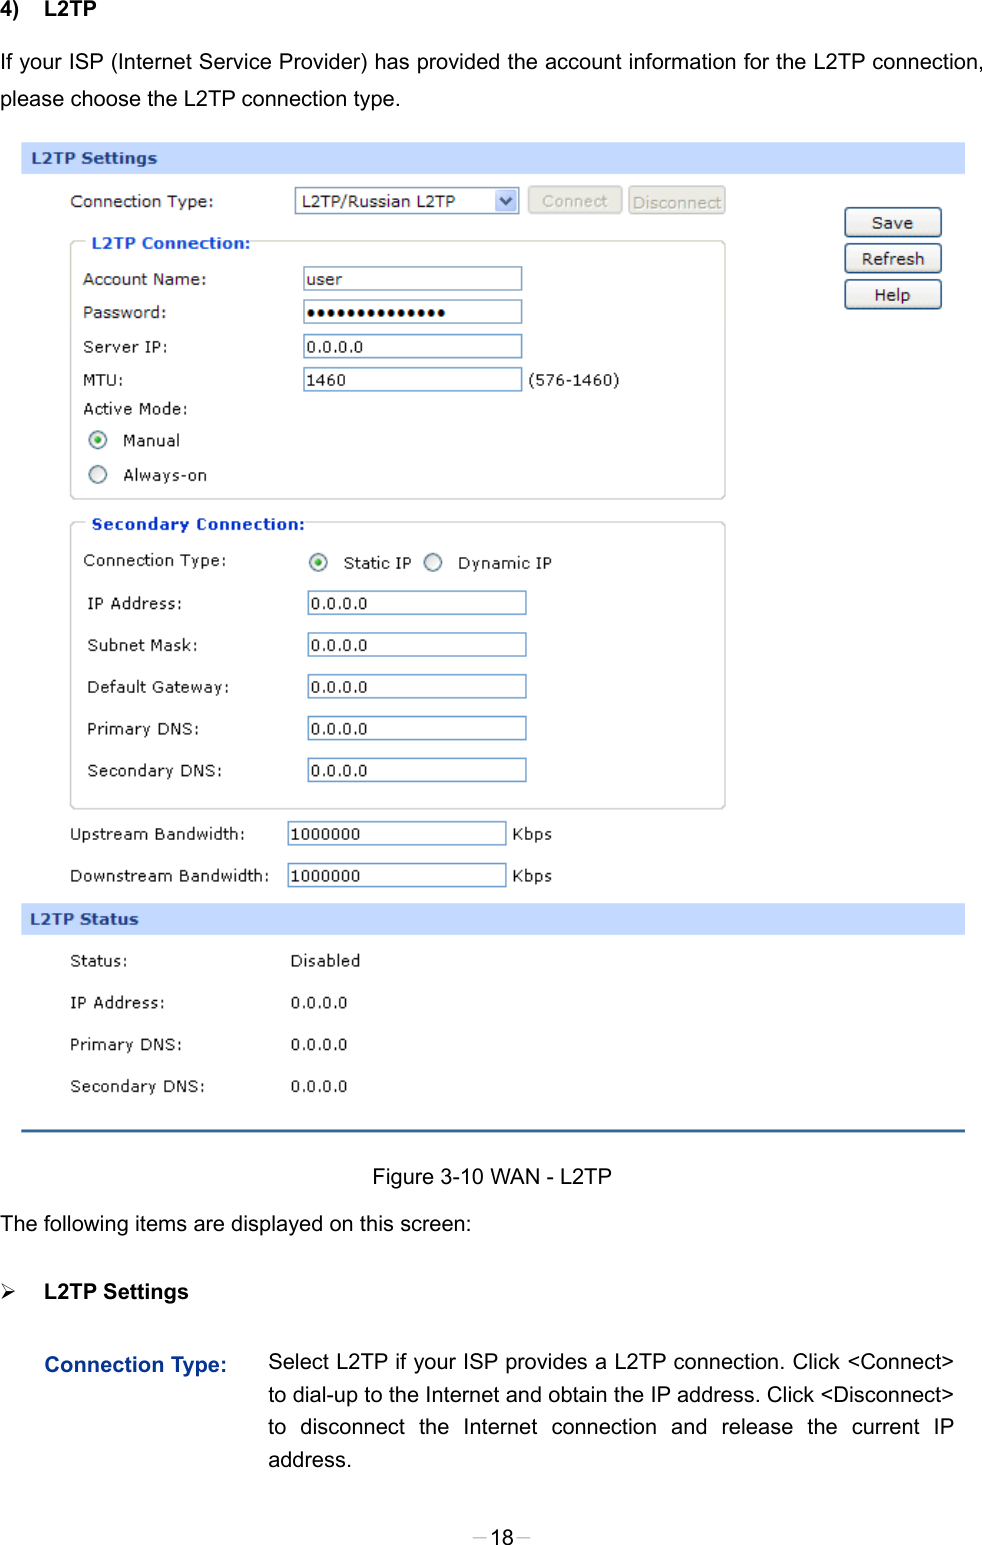  4) L2TP   If your ISP (Internet Service Provider) has provided the account information for the L2TP connection, please choose the L2TP connection type.  Figure 3-10 WAN - L2TP The following items are displayed on this screen:  L2TP Settings   Connection Type:  Select L2TP if your ISP provides a L2TP connection. Click &lt;Connect&gt; to dial-up to the Internet and obtain the IP address. Click &lt;Disconnect&gt; to disconnect the Internet connection and release the current IP address.   -18- 